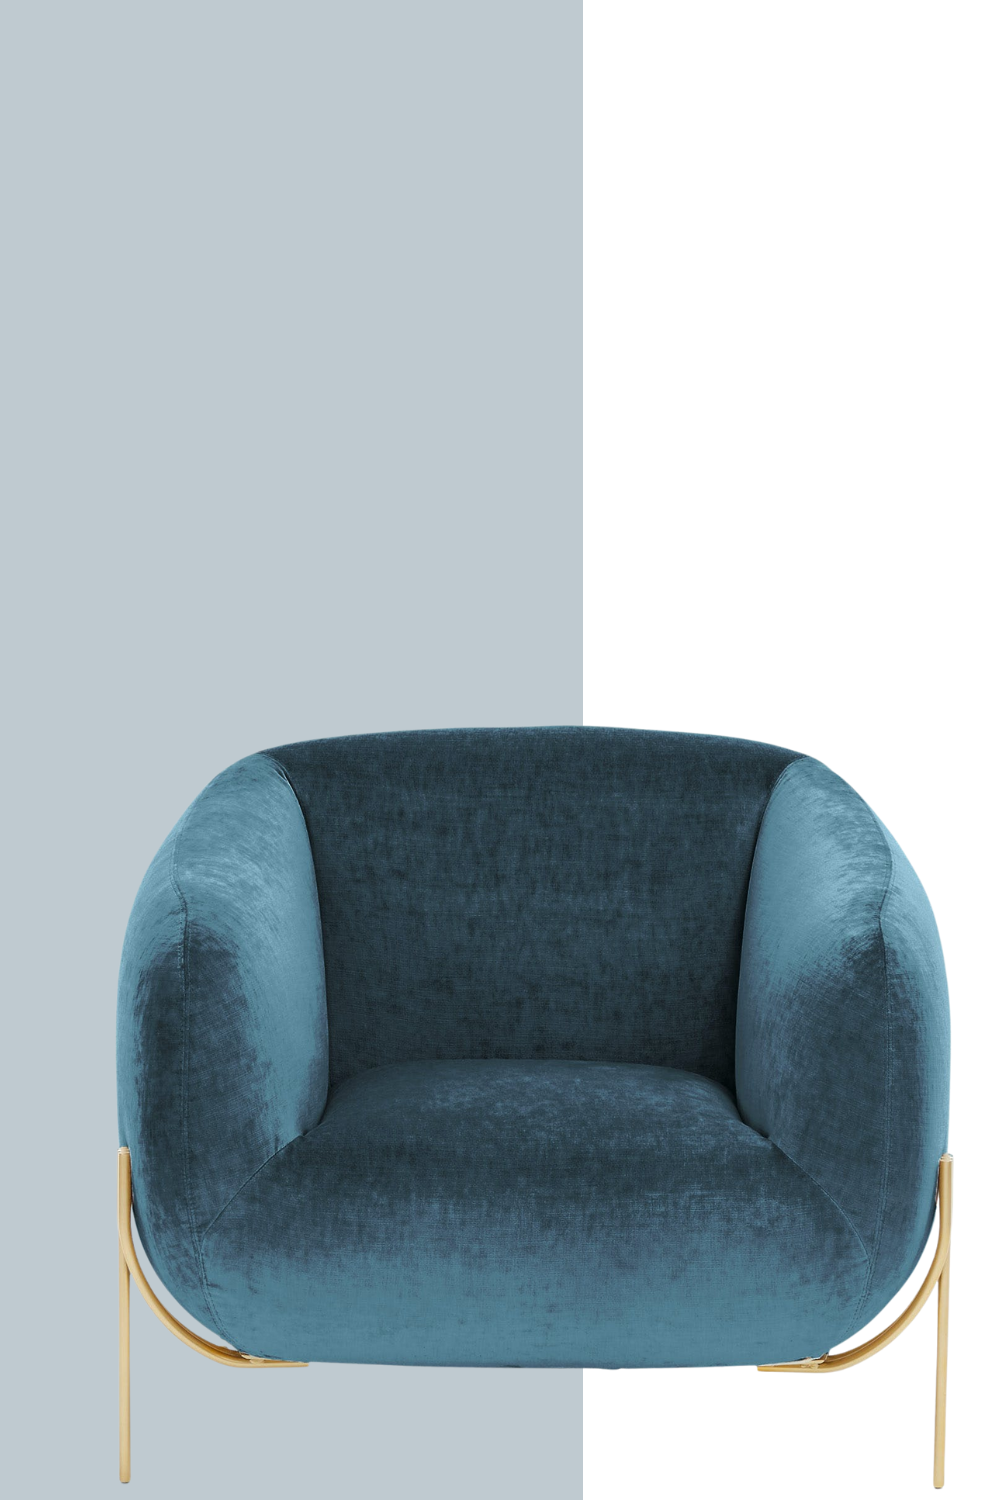 Geo Armchair, Velvet, with rounded upholstered corners and metallic legs in gold finish